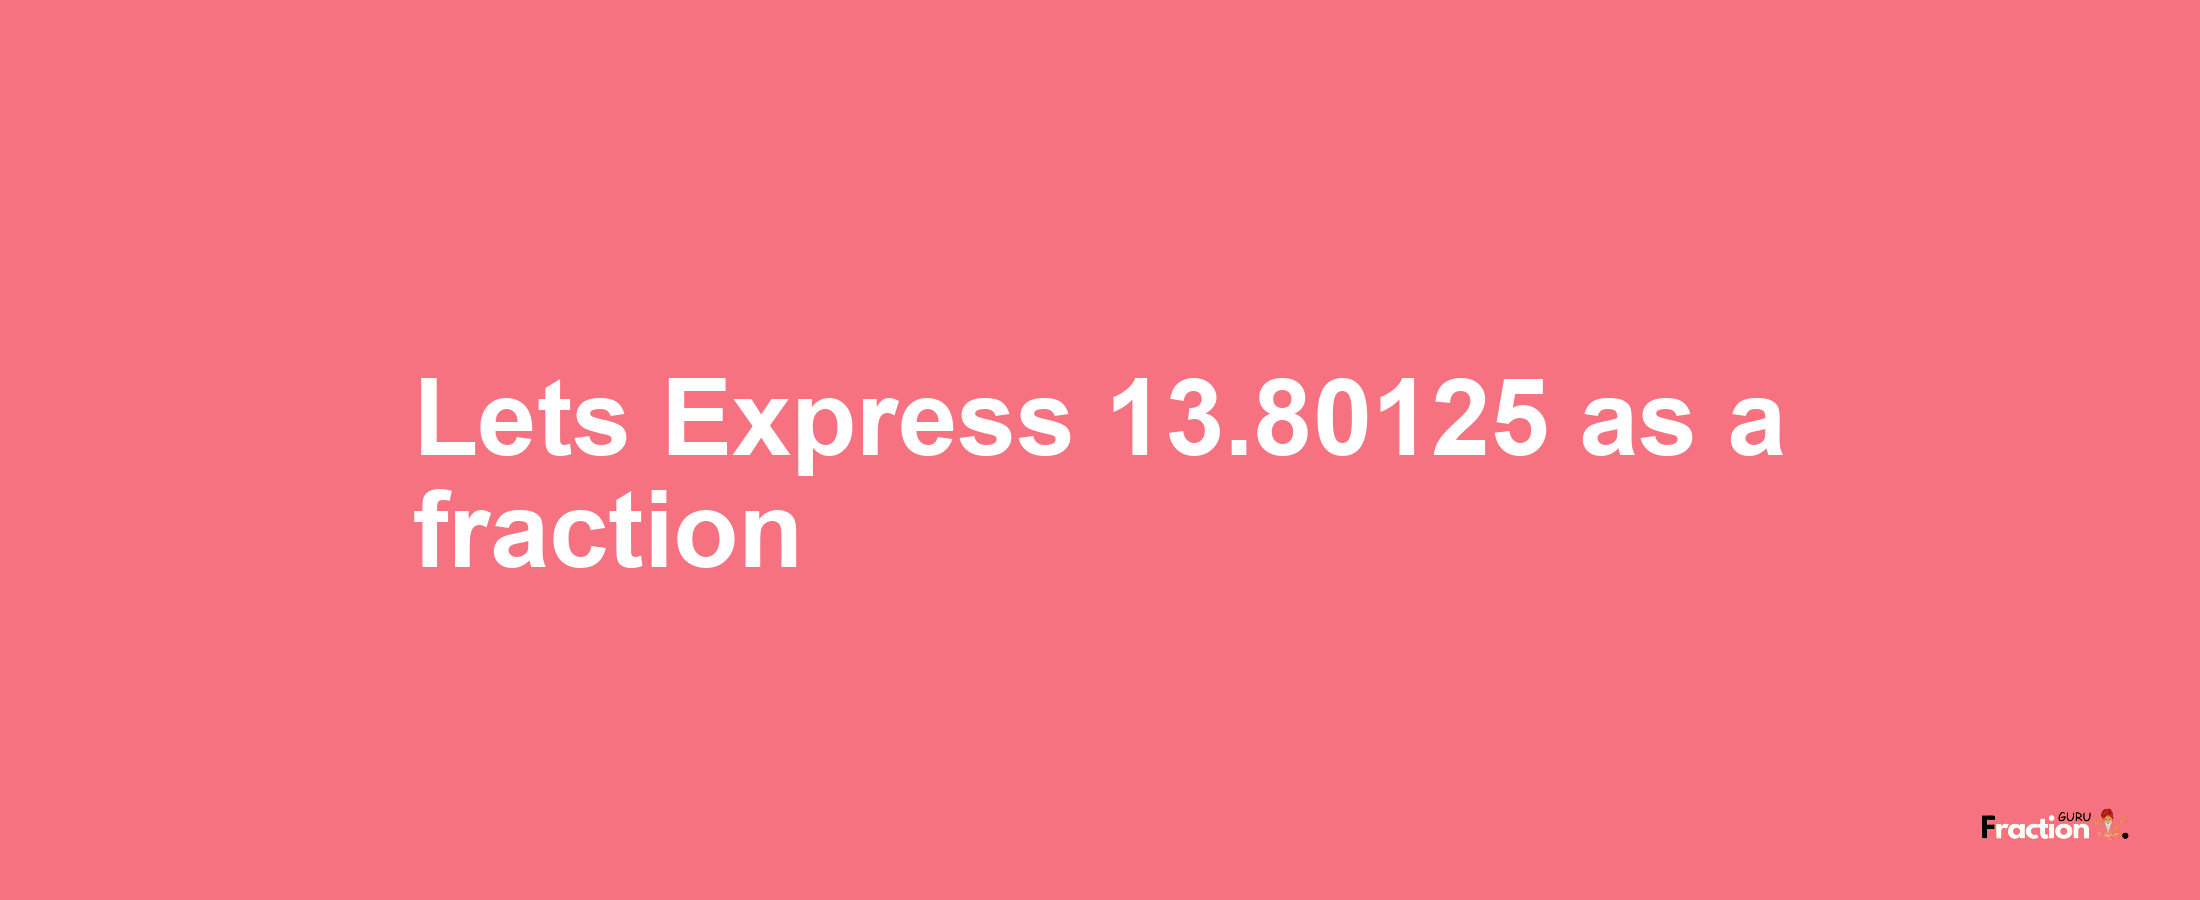 Lets Express 13.80125 as afraction